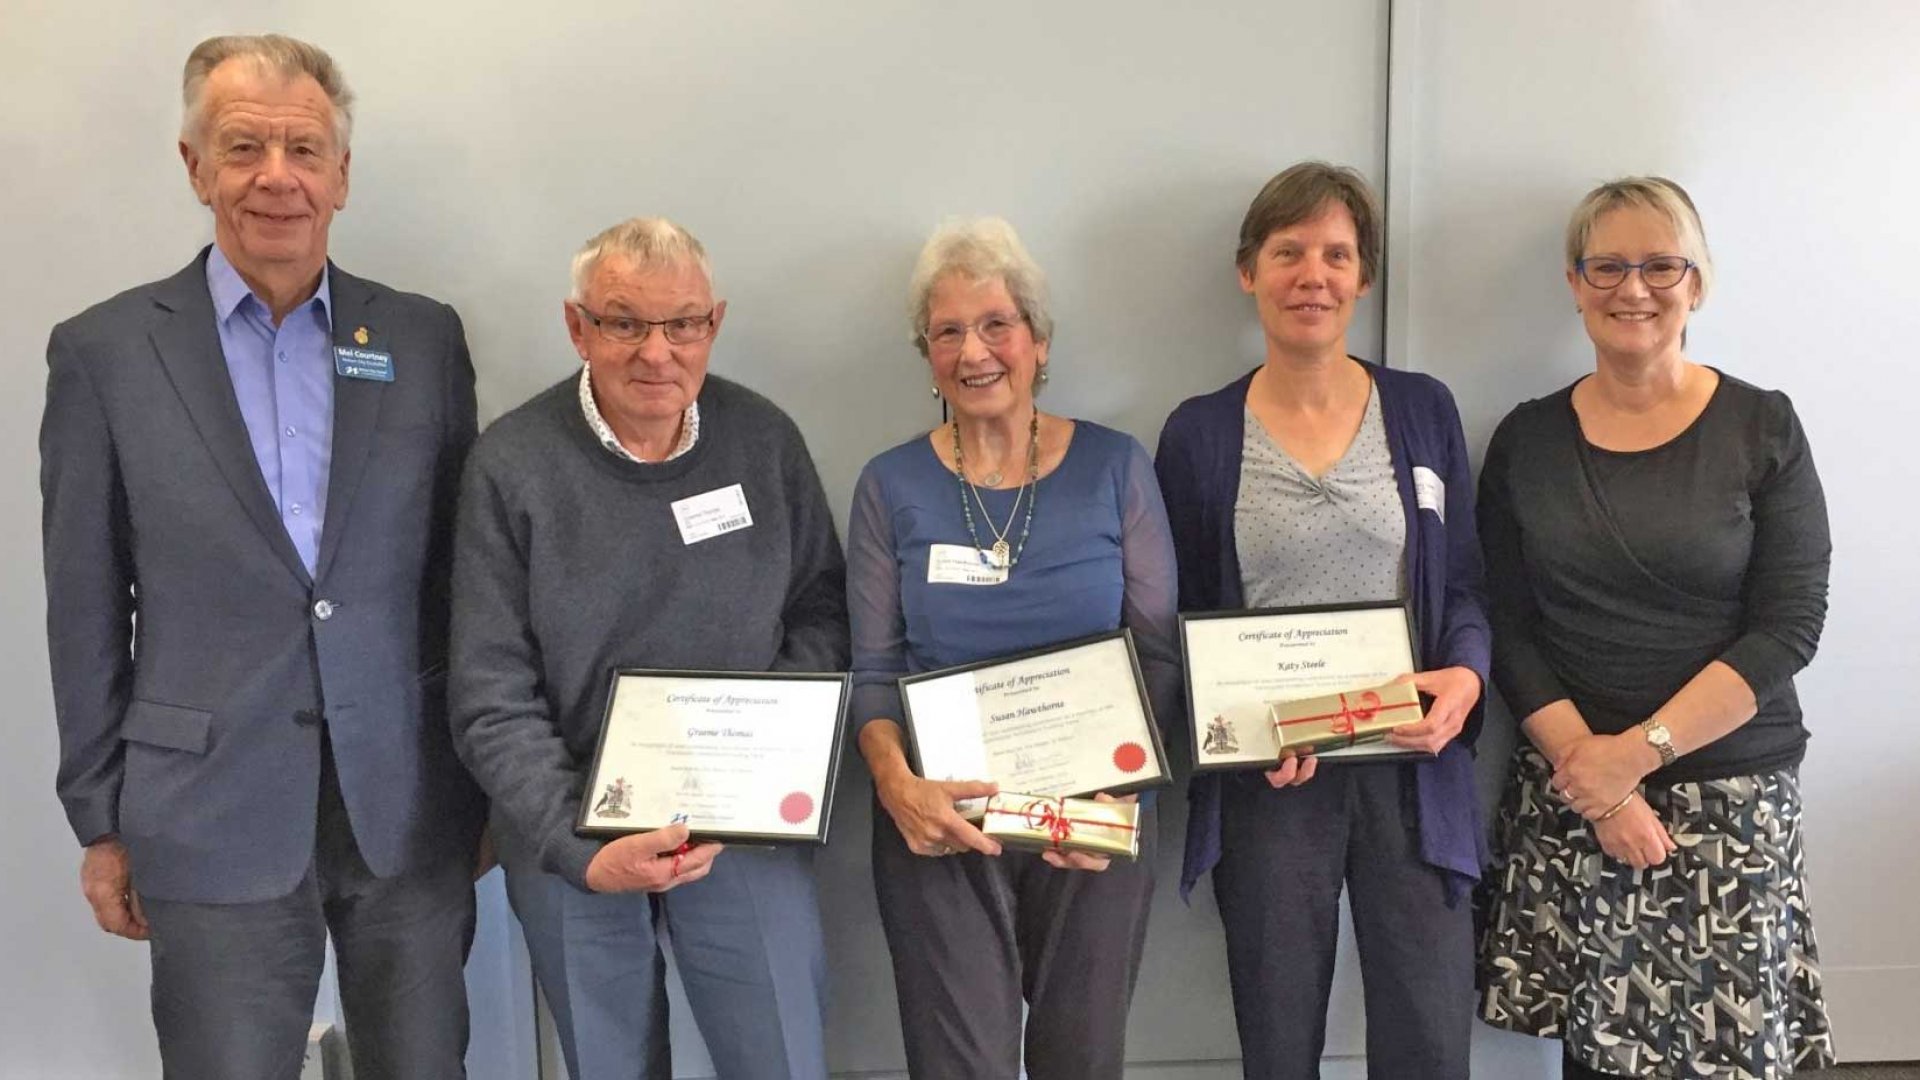 Councillor Mel Courtney (pictured left) and Community Services Committee Chair Gaile Noonan (right) presented Graeme Thomas (L to R), Susan Hawthorne, Katy Steele, and Rachel Saunders (absent) with a certificate and gift for their contribution over the last three years in November 2019.